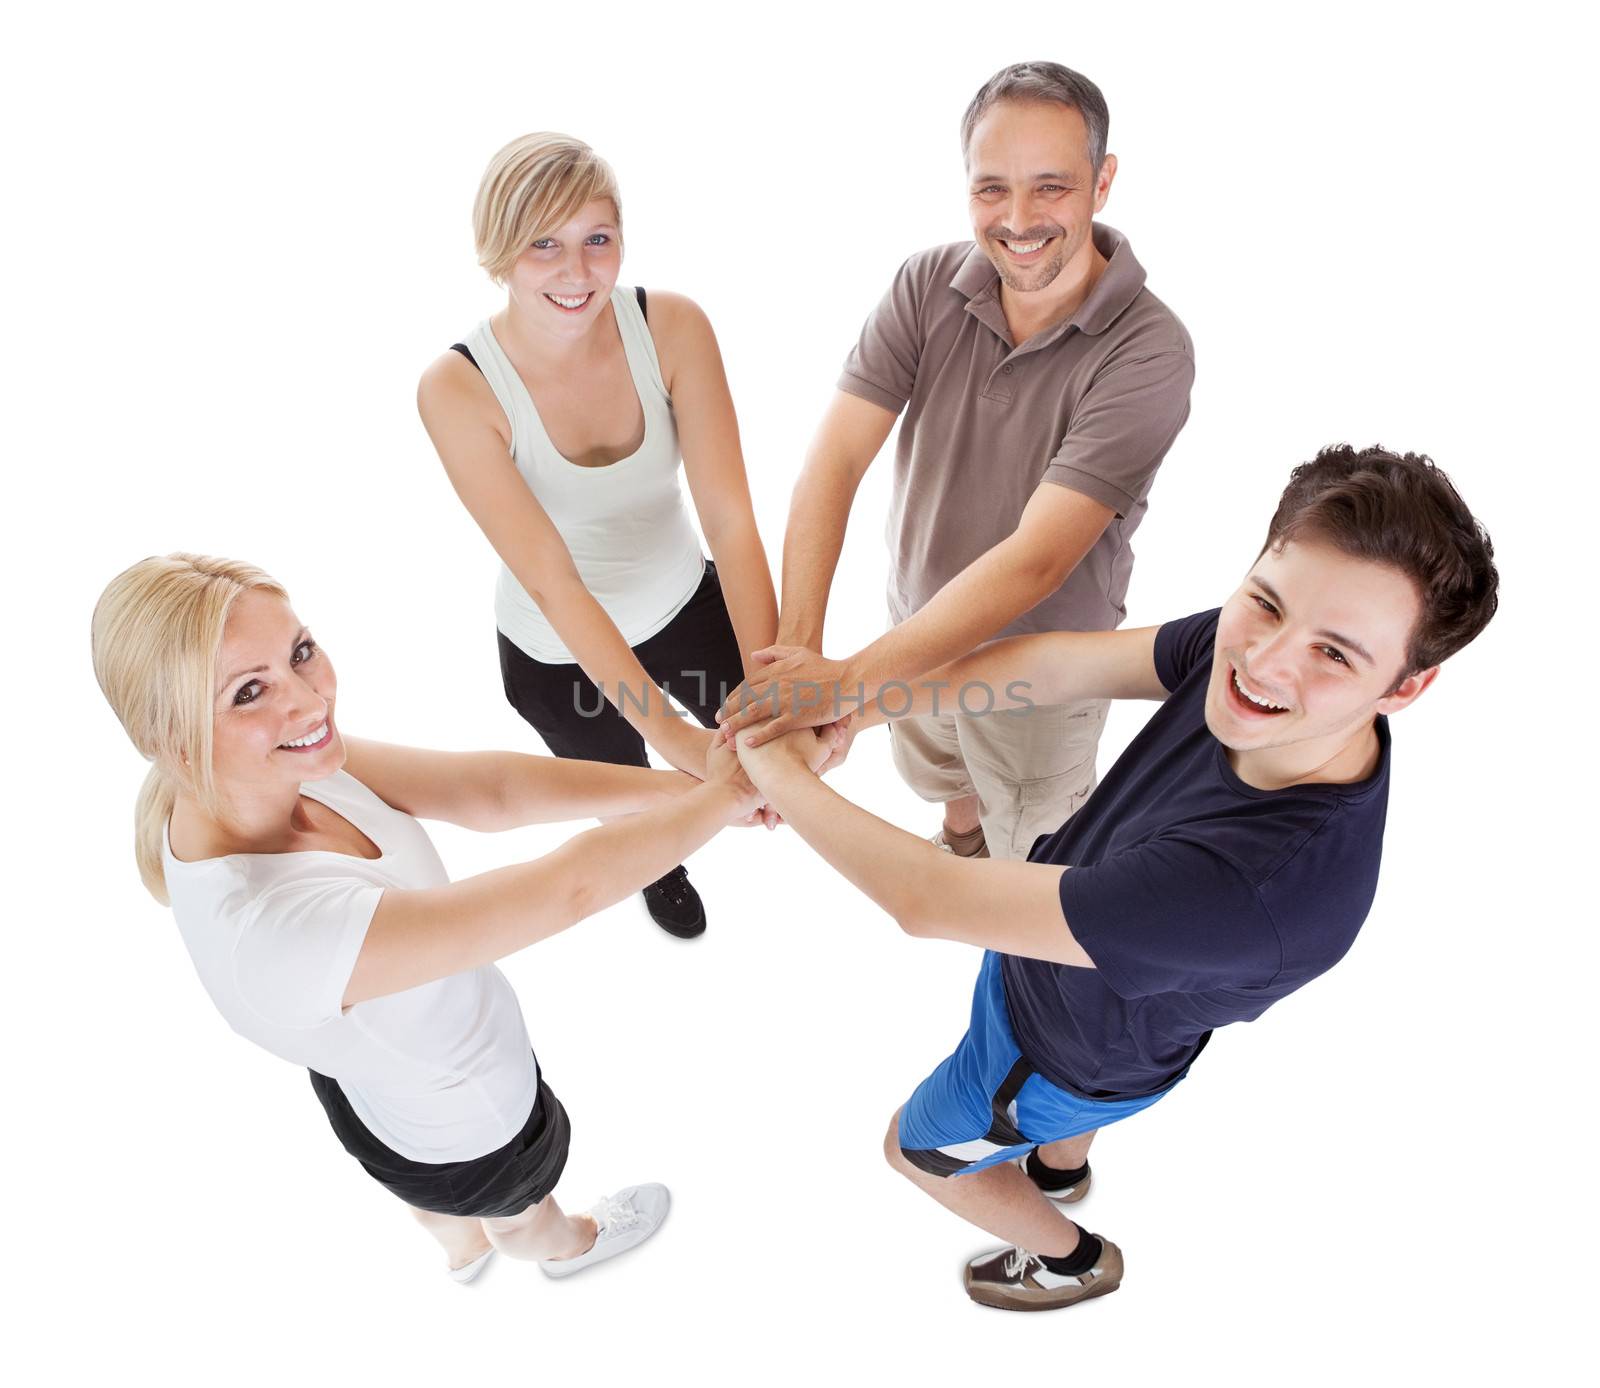 High angle view of a happy family with a teenage son and daughter holding hands